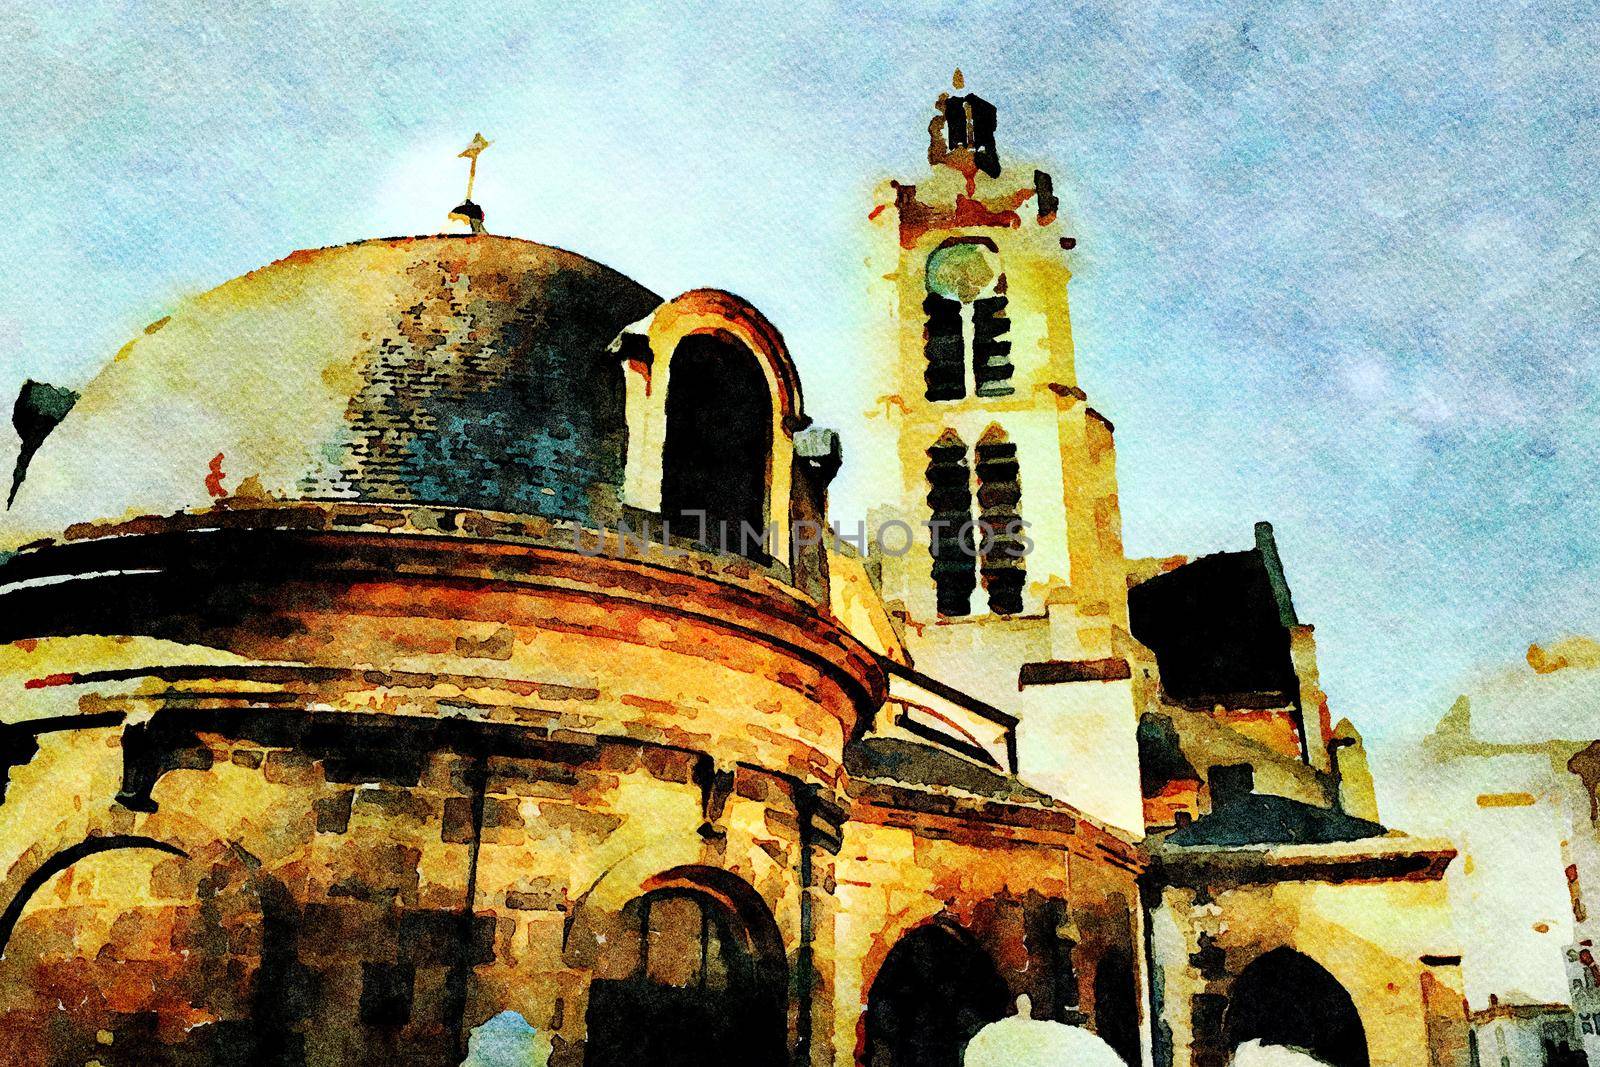 Watercolor representing one of the churches in central Paris in the autumn